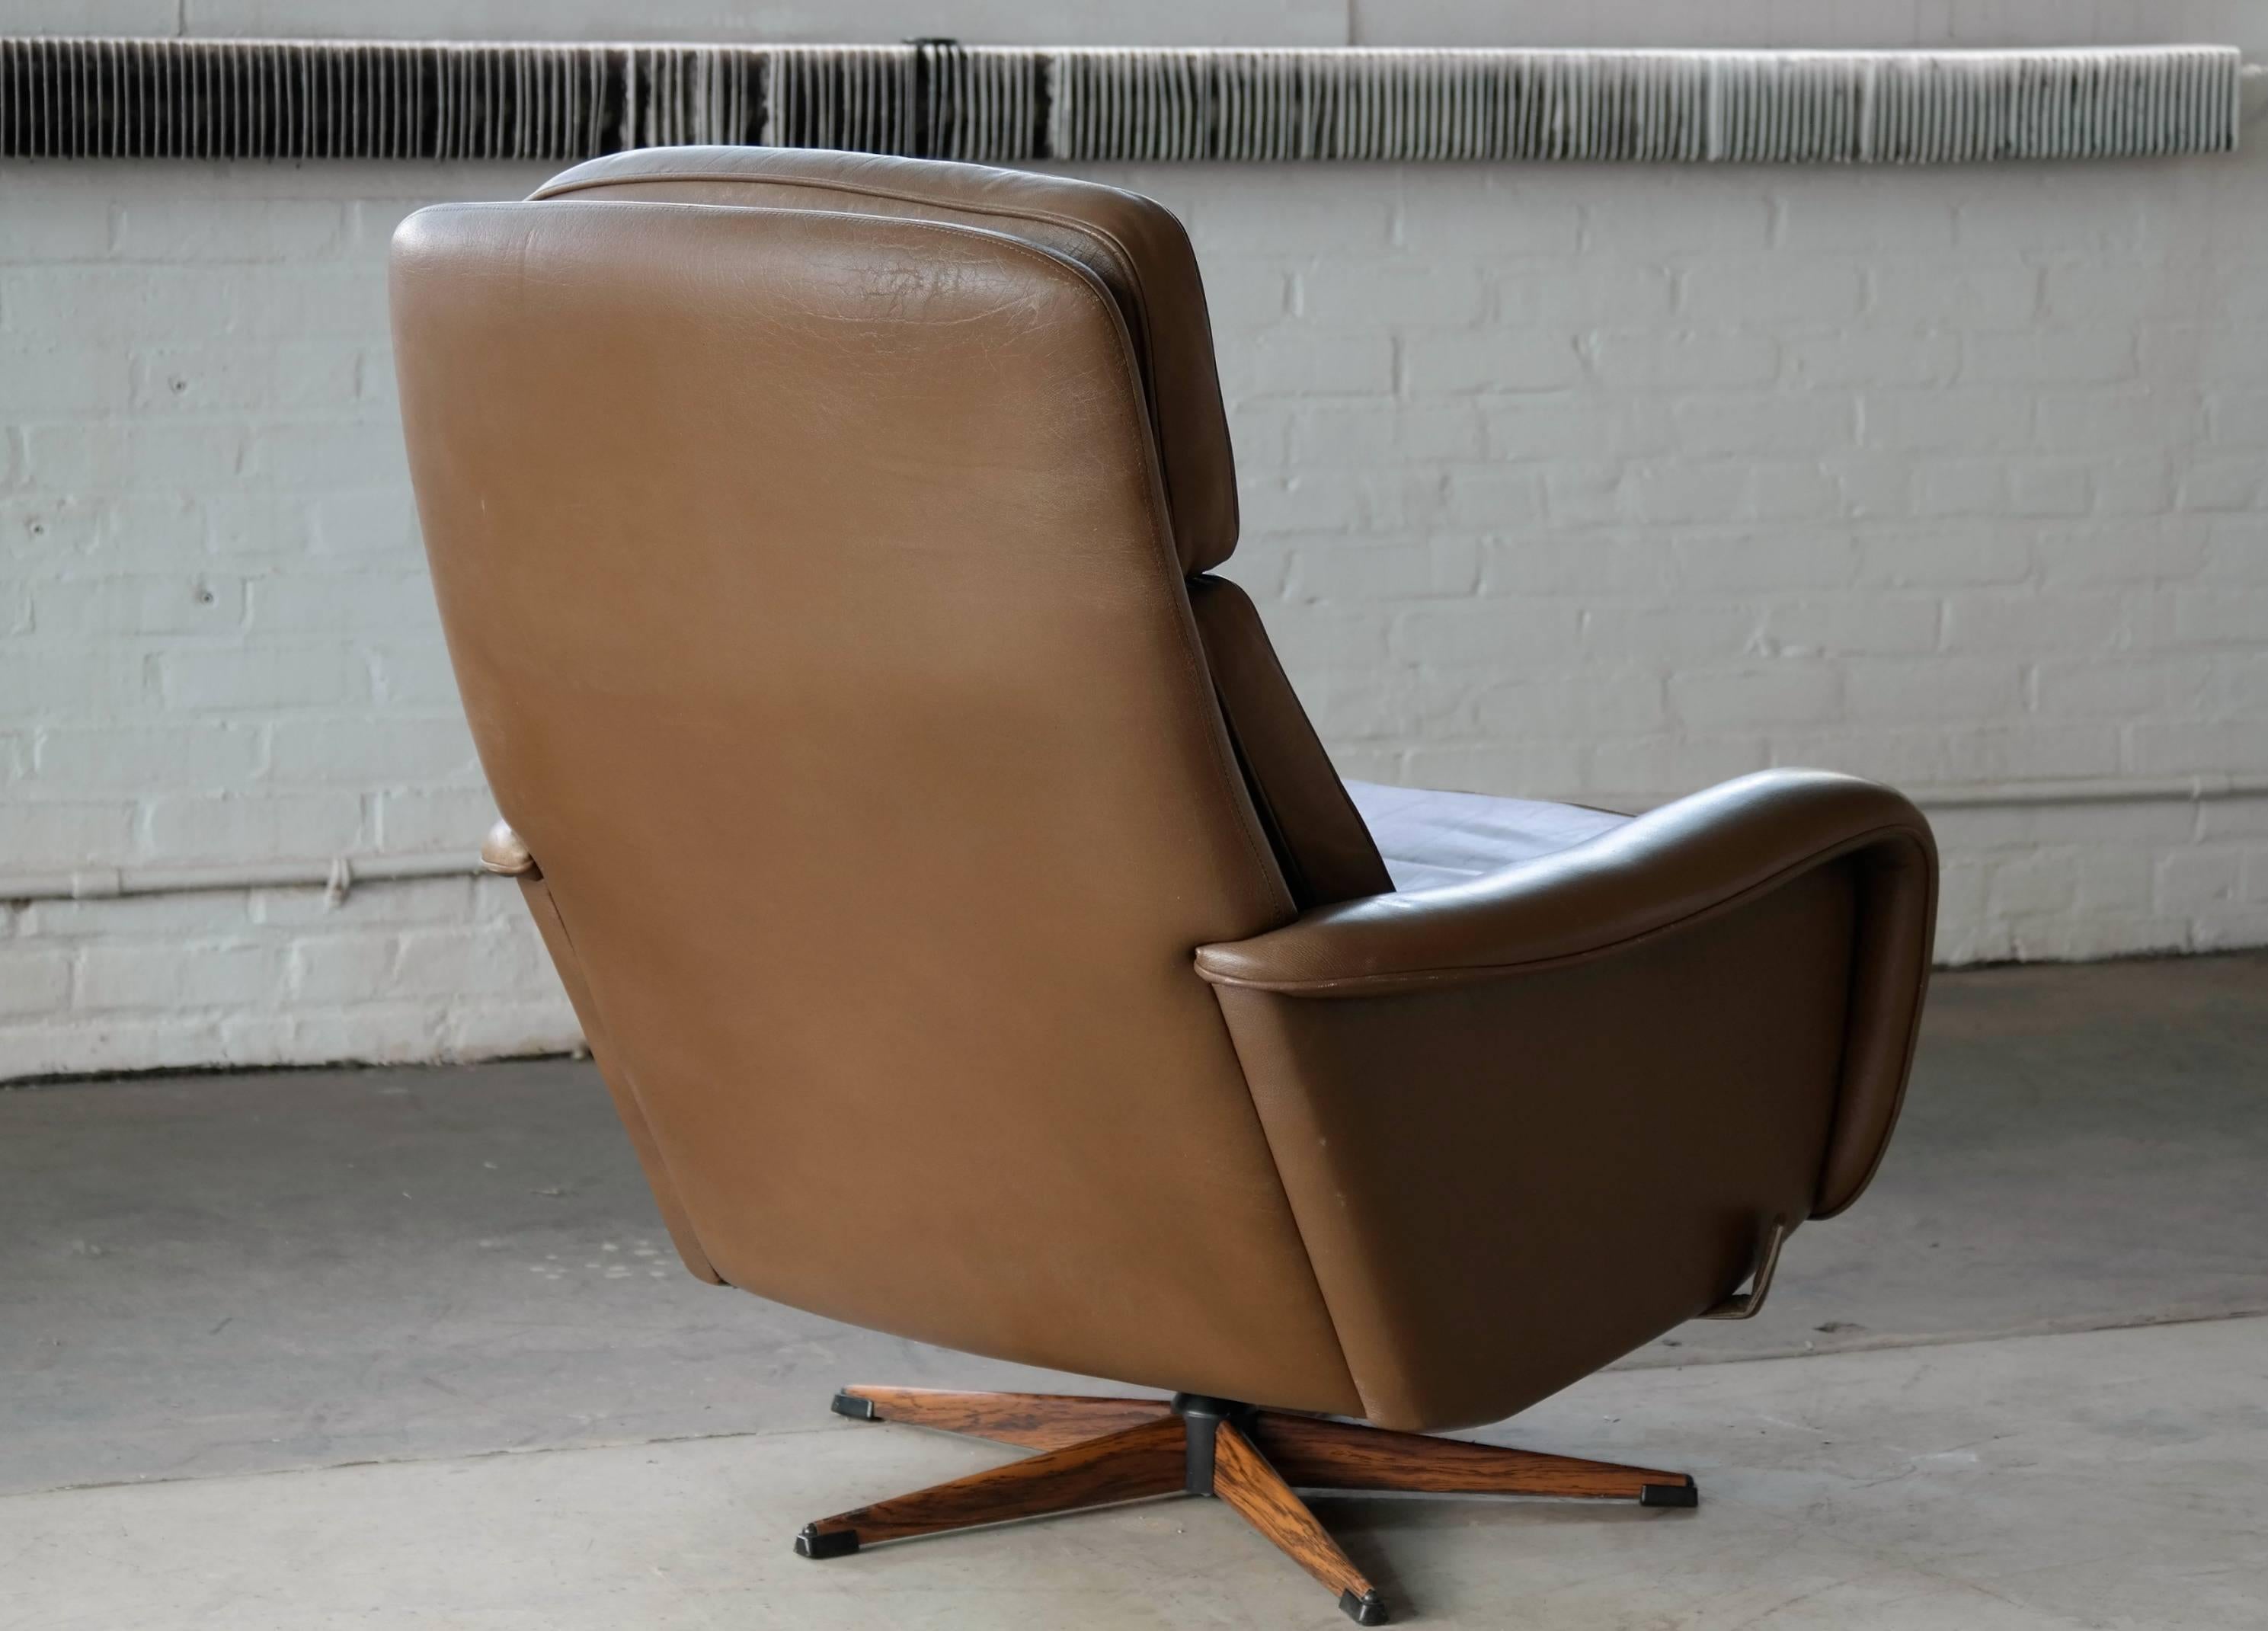 Late 20th Century Danish Mid-Century Leather Swivel Lounge Chair with Ottoman by Madsen & Schubel